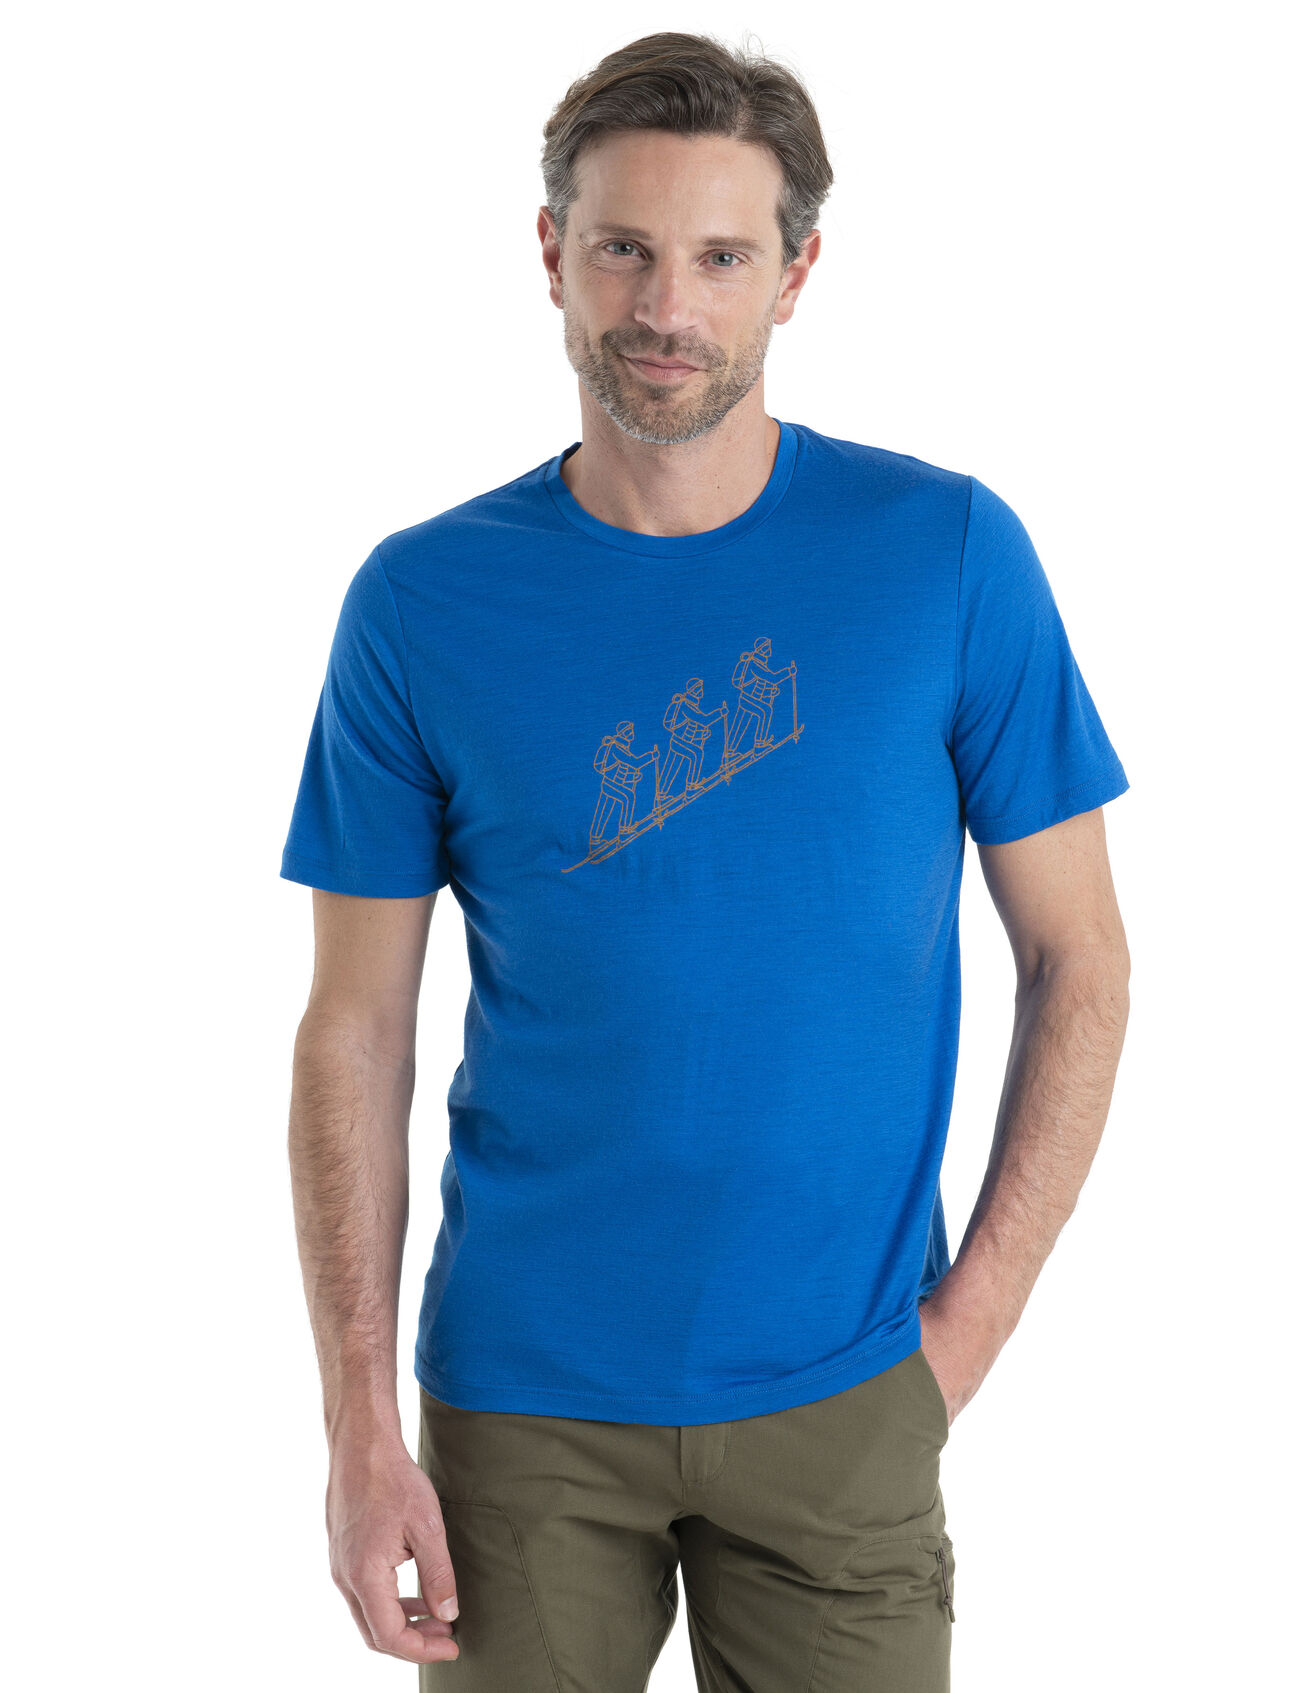 Mens Merino 150 Tech Lite II Short Sleeve T-Shirt Natural Ski Tour Our versatile tech tee that provides comfort, breathability and odour-resistance for any adventure you can think of, the 150 Tech Lite II Short Sleeve Tee Natural Ski Tour features 100% merino for all-natural performance. The tee's original logo graphic features a simple line drawing inspired by the rhythm and cadence of a backcountry ski tour. 